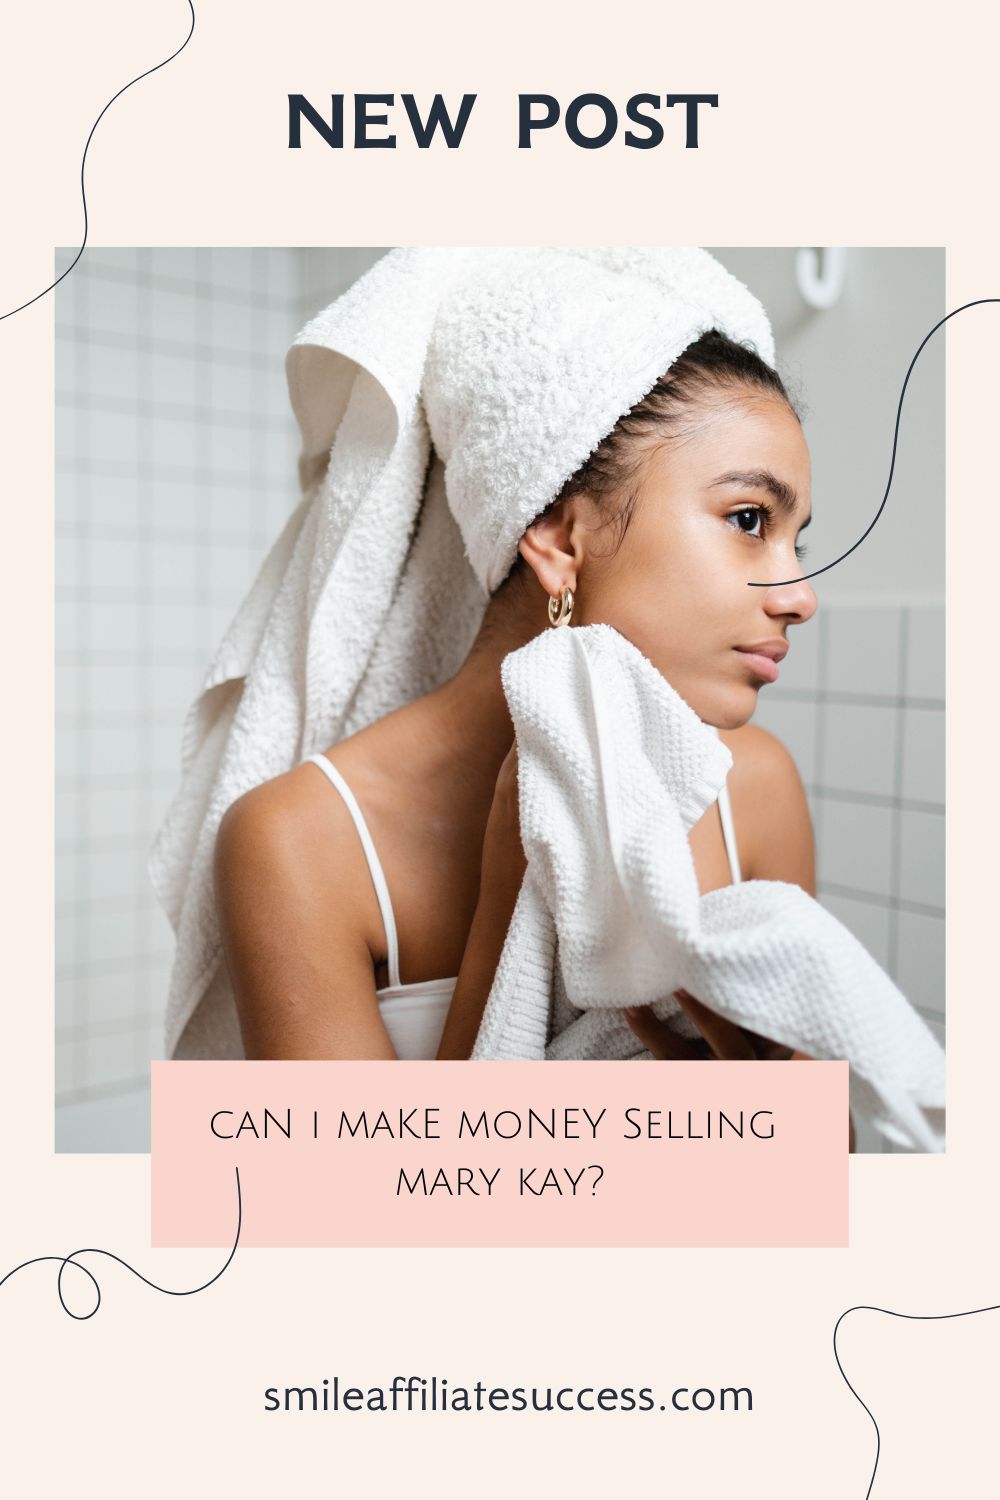 Should I Become A Mary Kay Consultant?